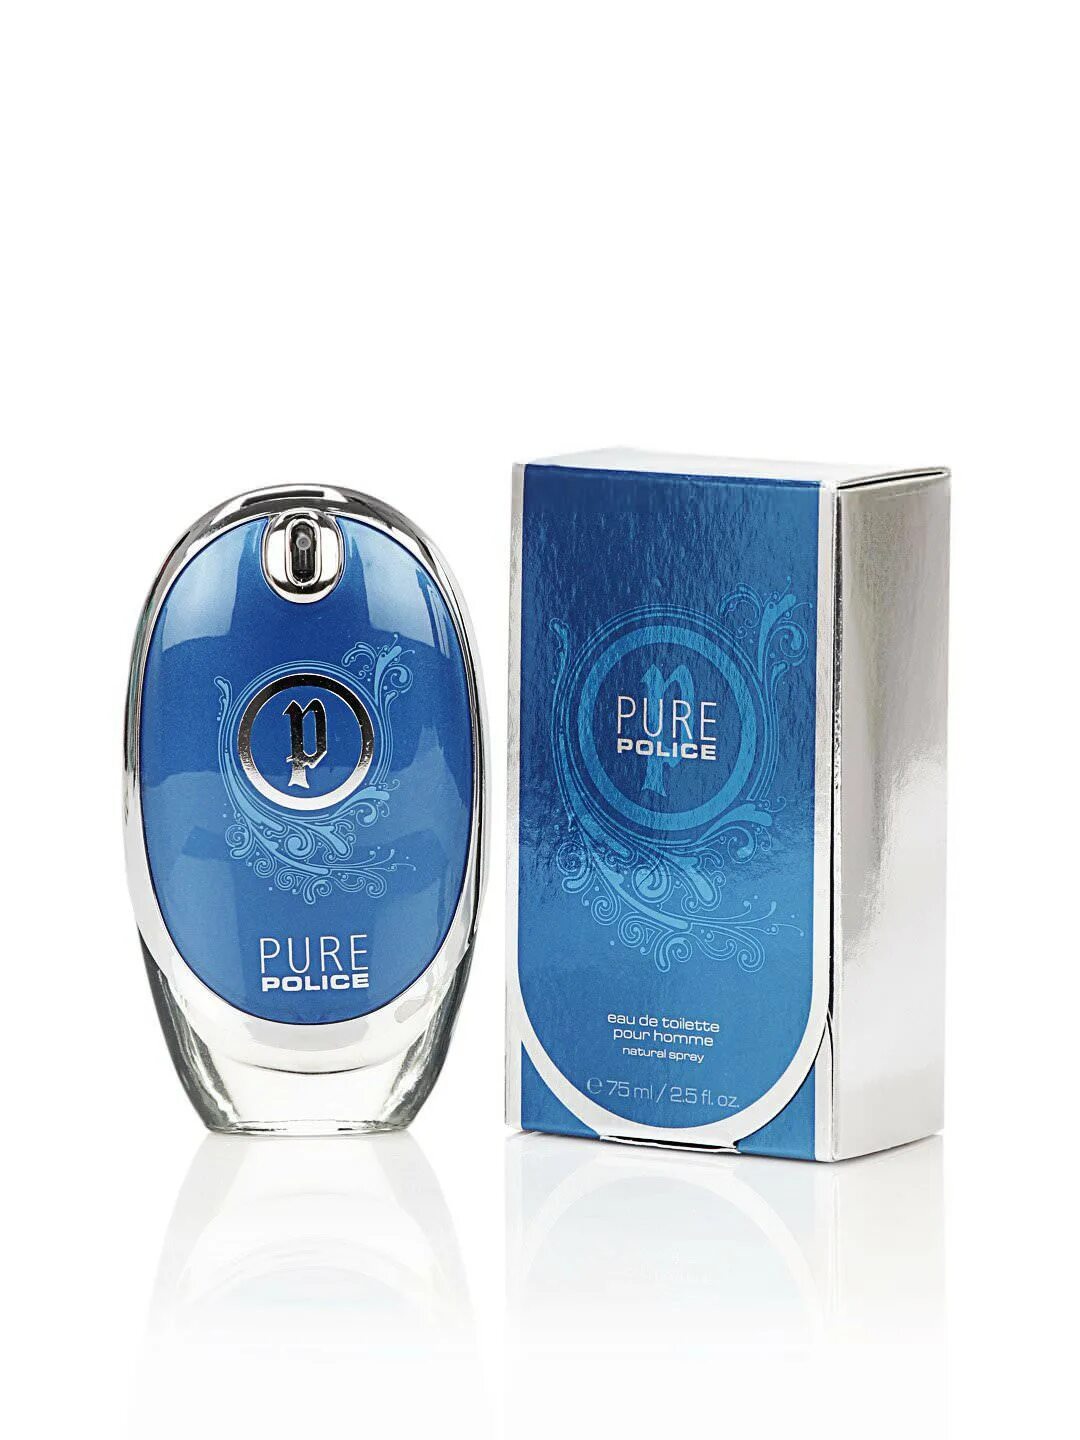 Pure Police духи женские. Альпа Пьюр Хомме. Police Pure DNA femme. Night Lure Pure homme. Pure homme